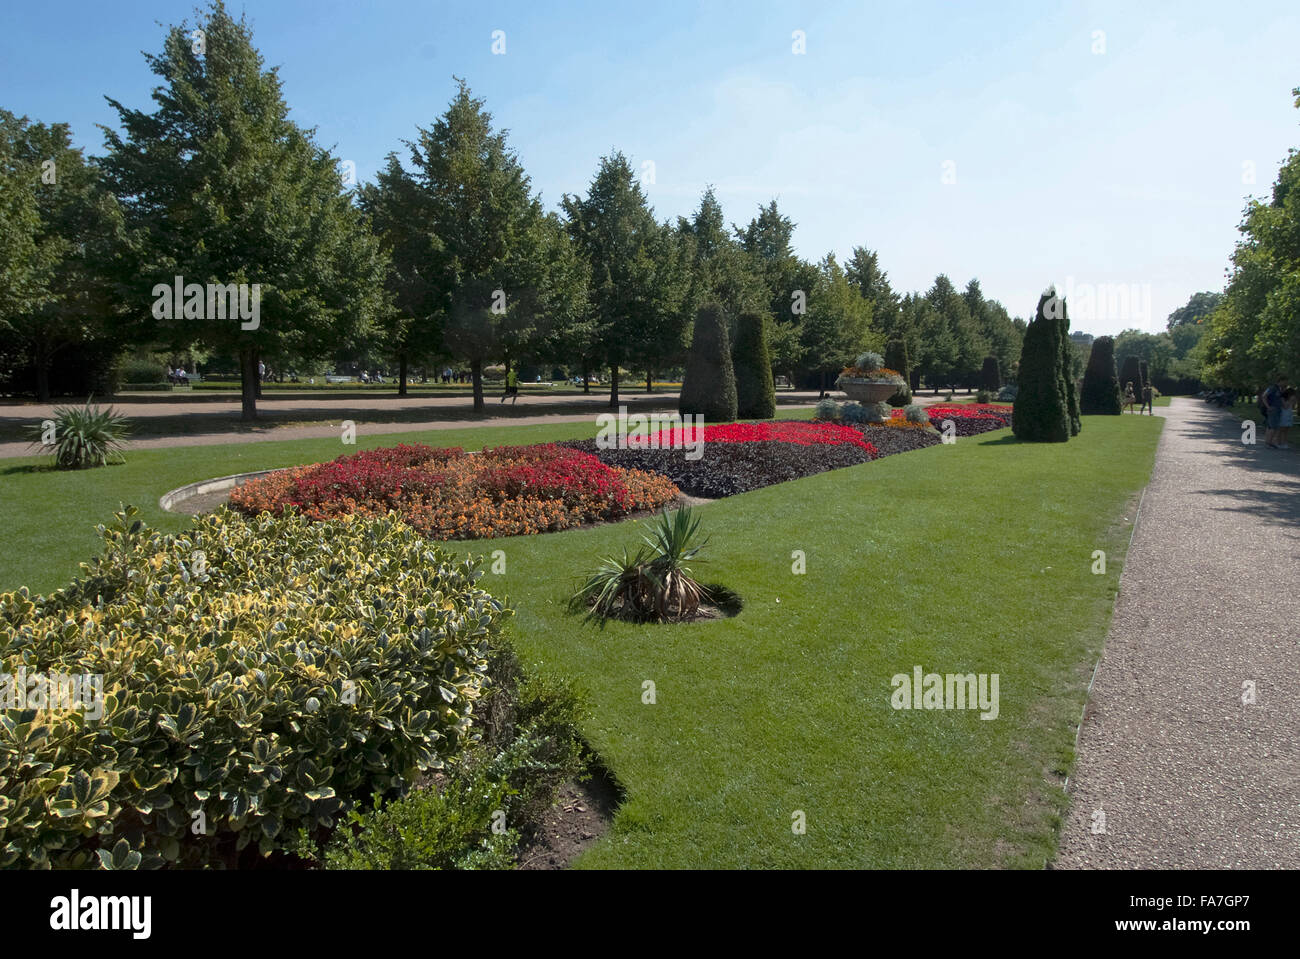 Regent's Park, London. A large open space, a city park with mature trees paths and flowerbeds. Stock Photo